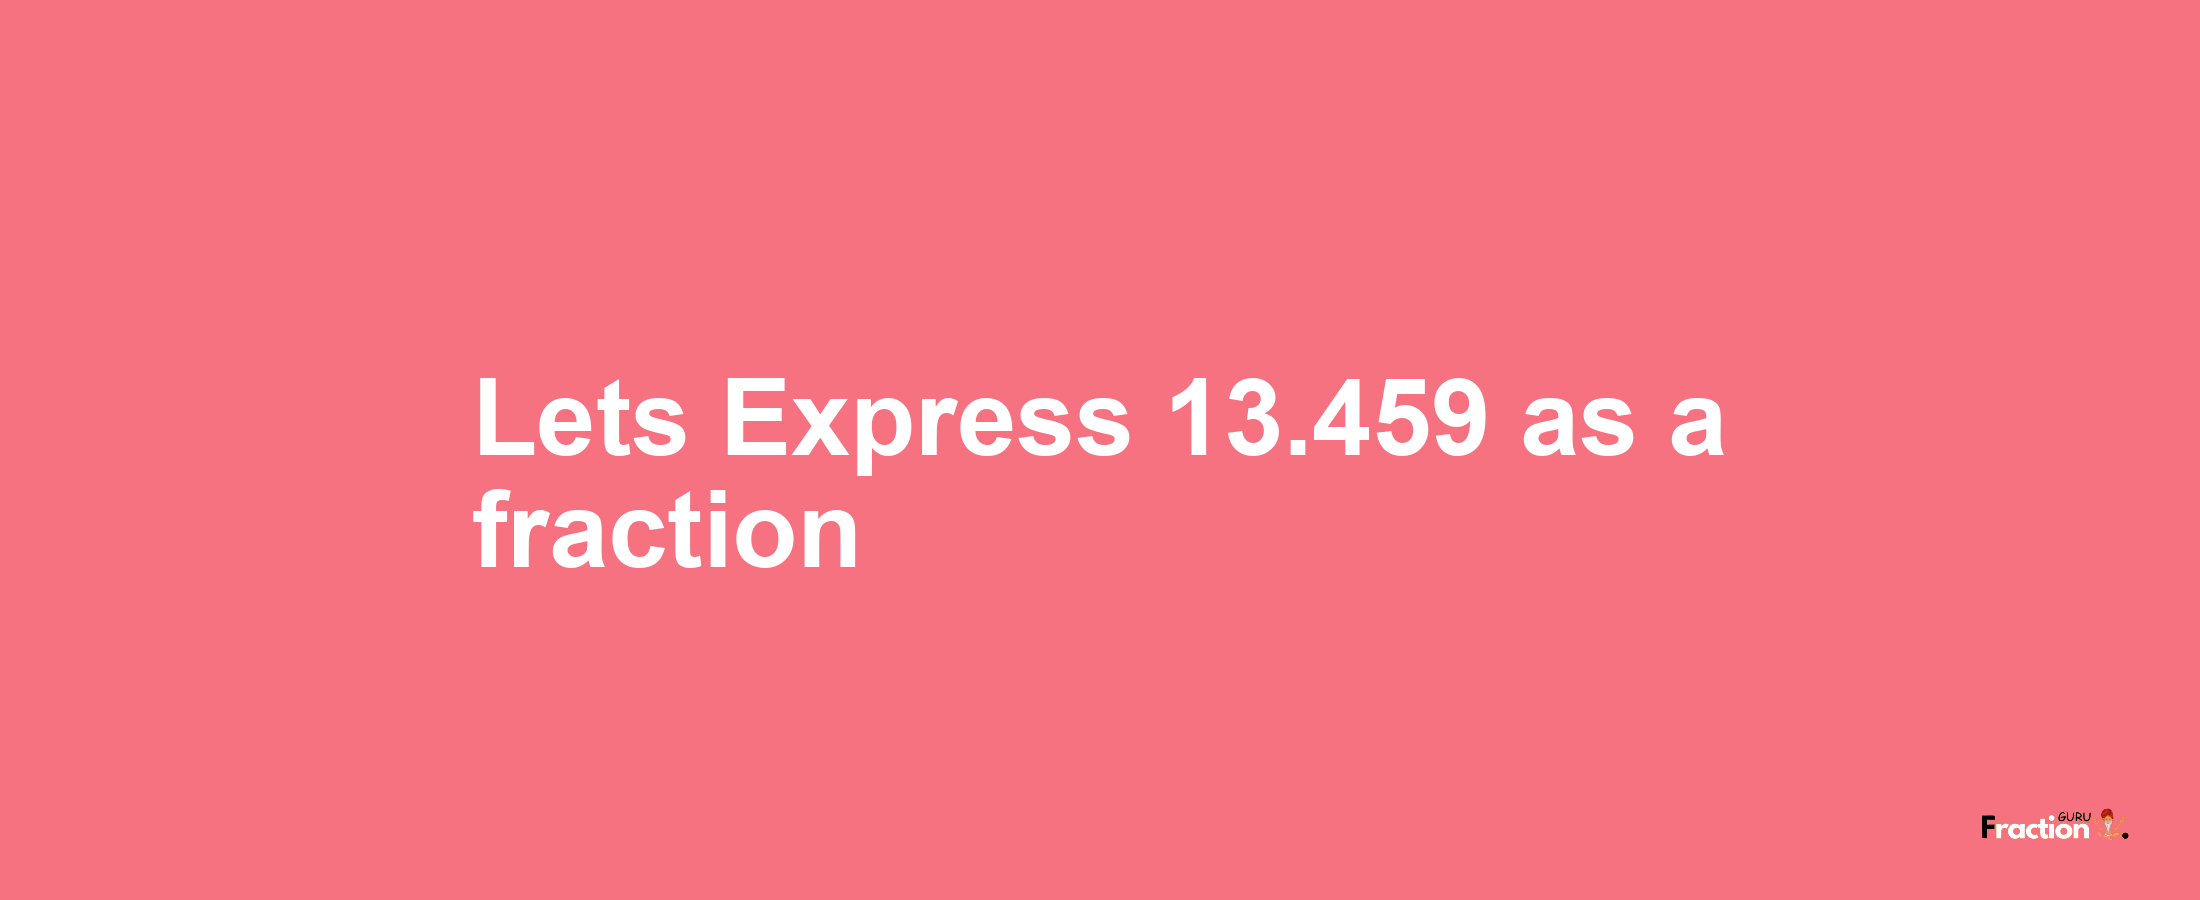 Lets Express 13.459 as afraction